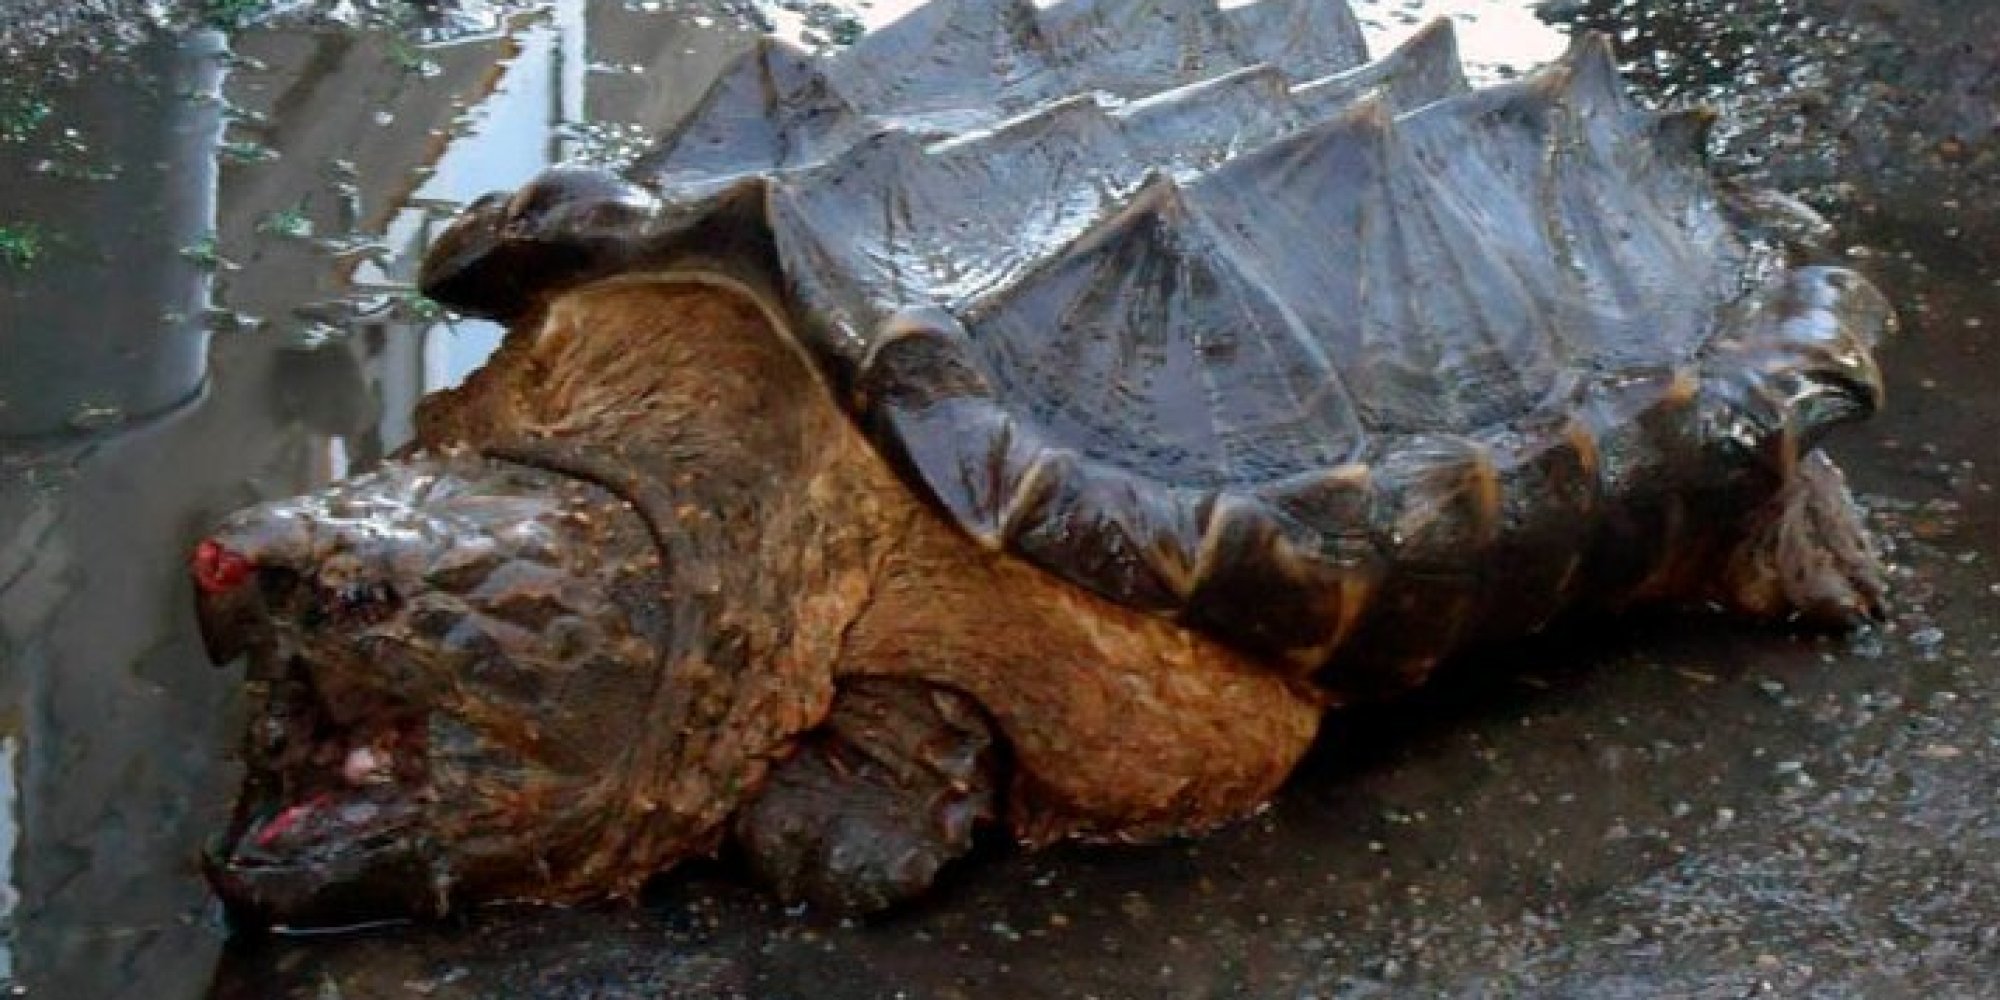 The 'Dinosaur Turtle' That Freaked Everyone Out Is An Alligator